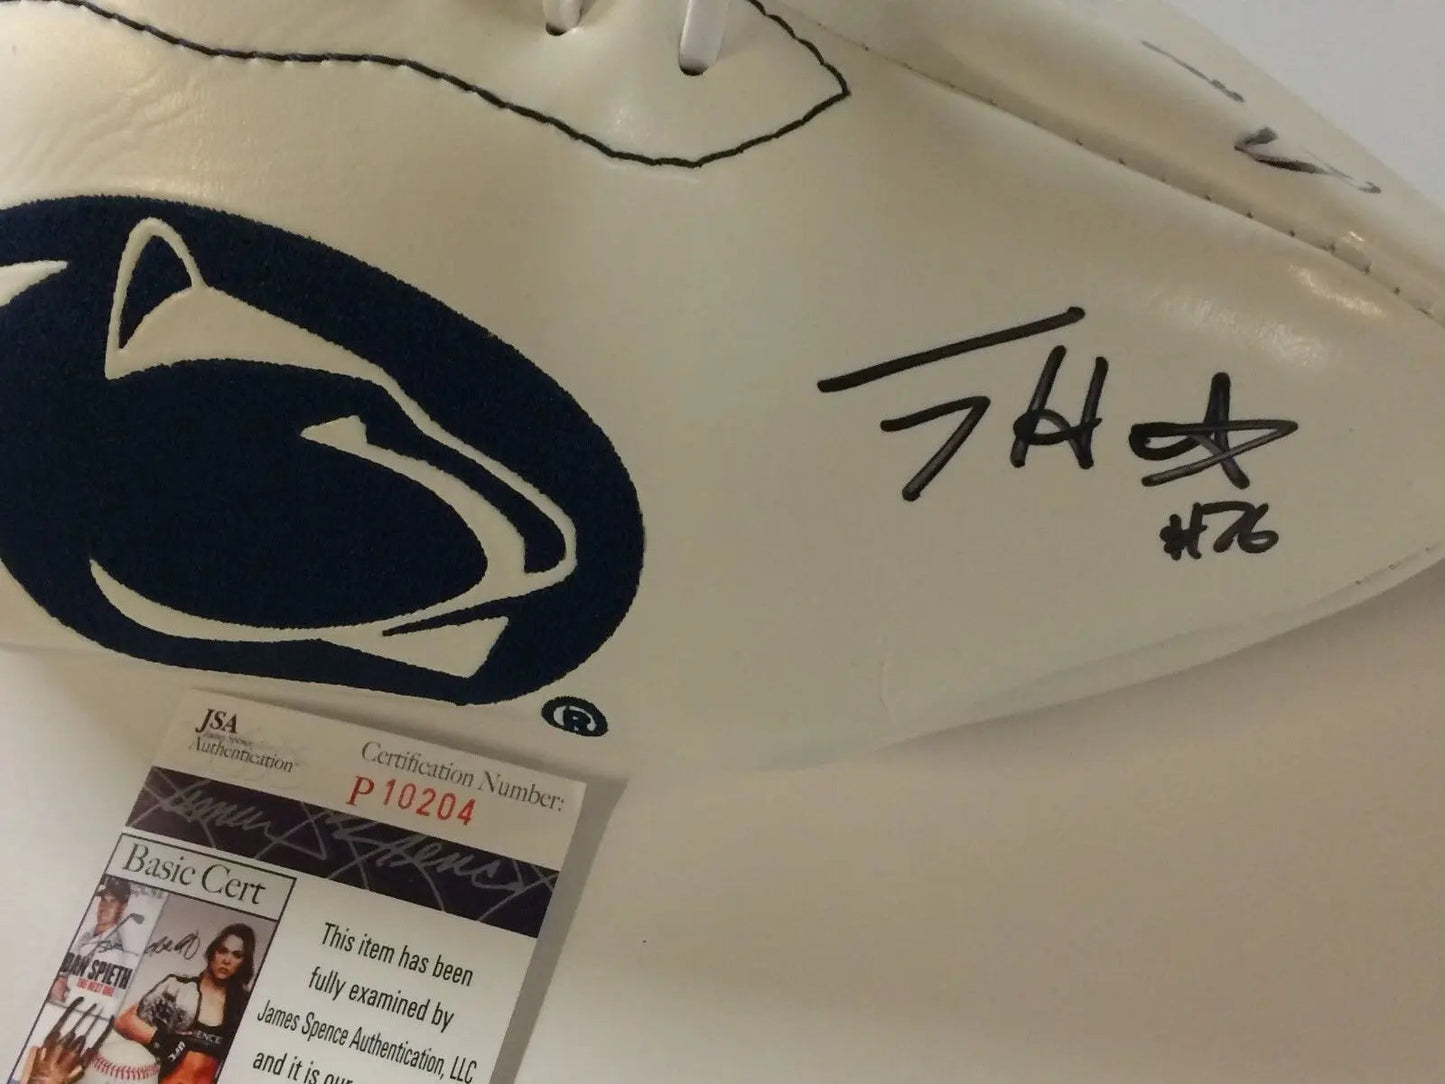 MVP Authentics All Time Rushing Leaders Autographed Signed Penn State Logo Football Jsa Coa 225 sports jersey framing , jersey framing